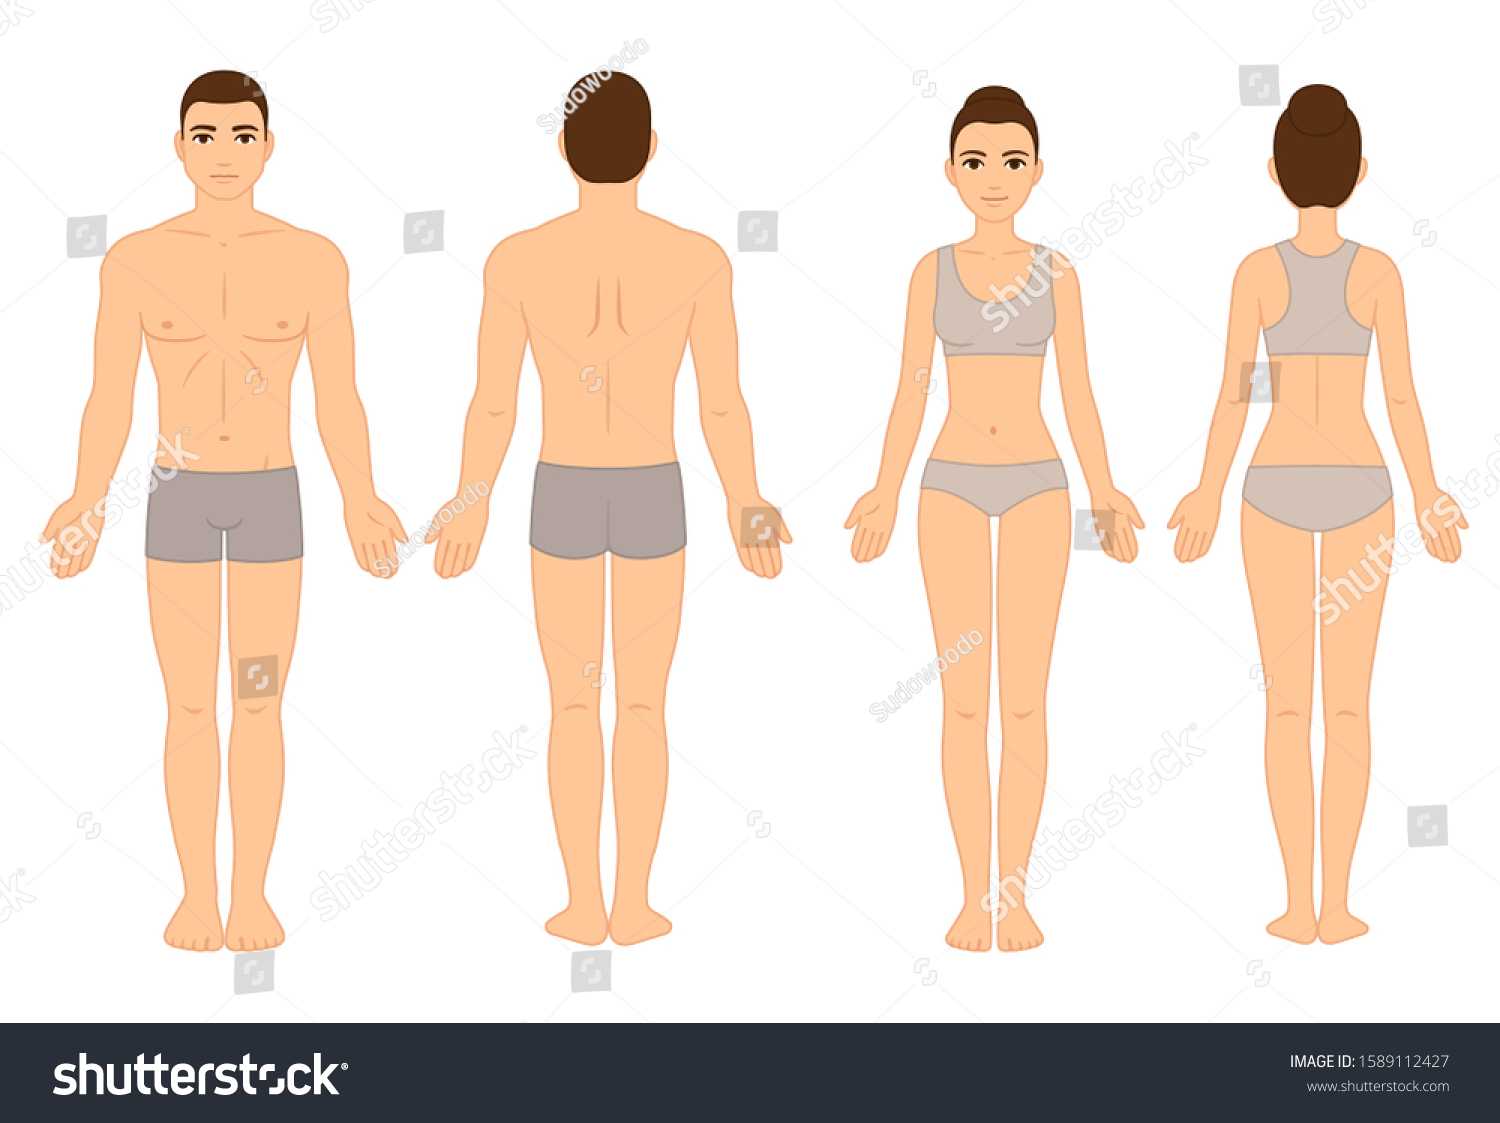 Female Body Template Images, Stock Photos & Vectors Throughout Blank Body Map Template